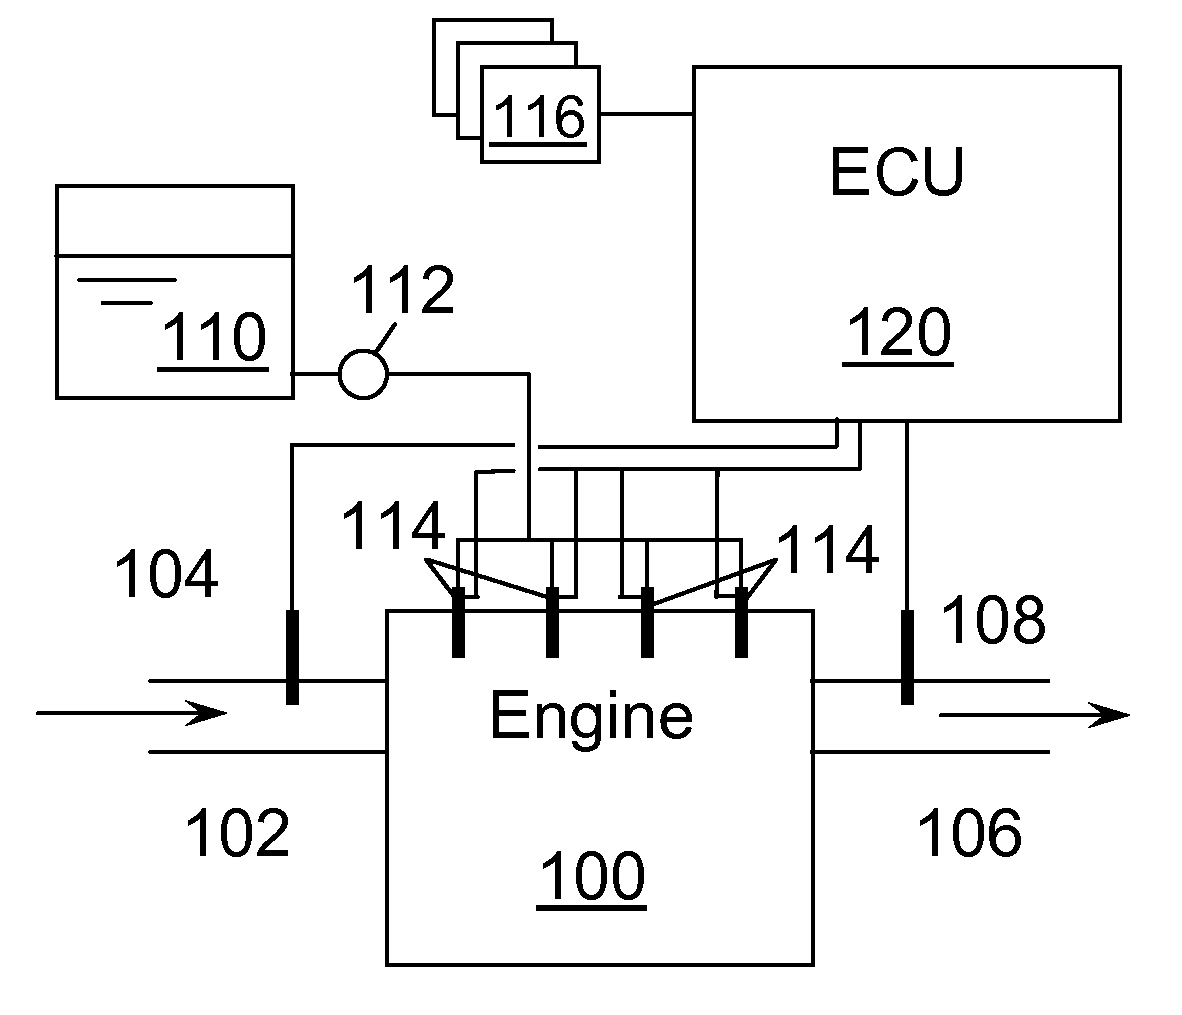 Identification of air and/or fuel metering drift